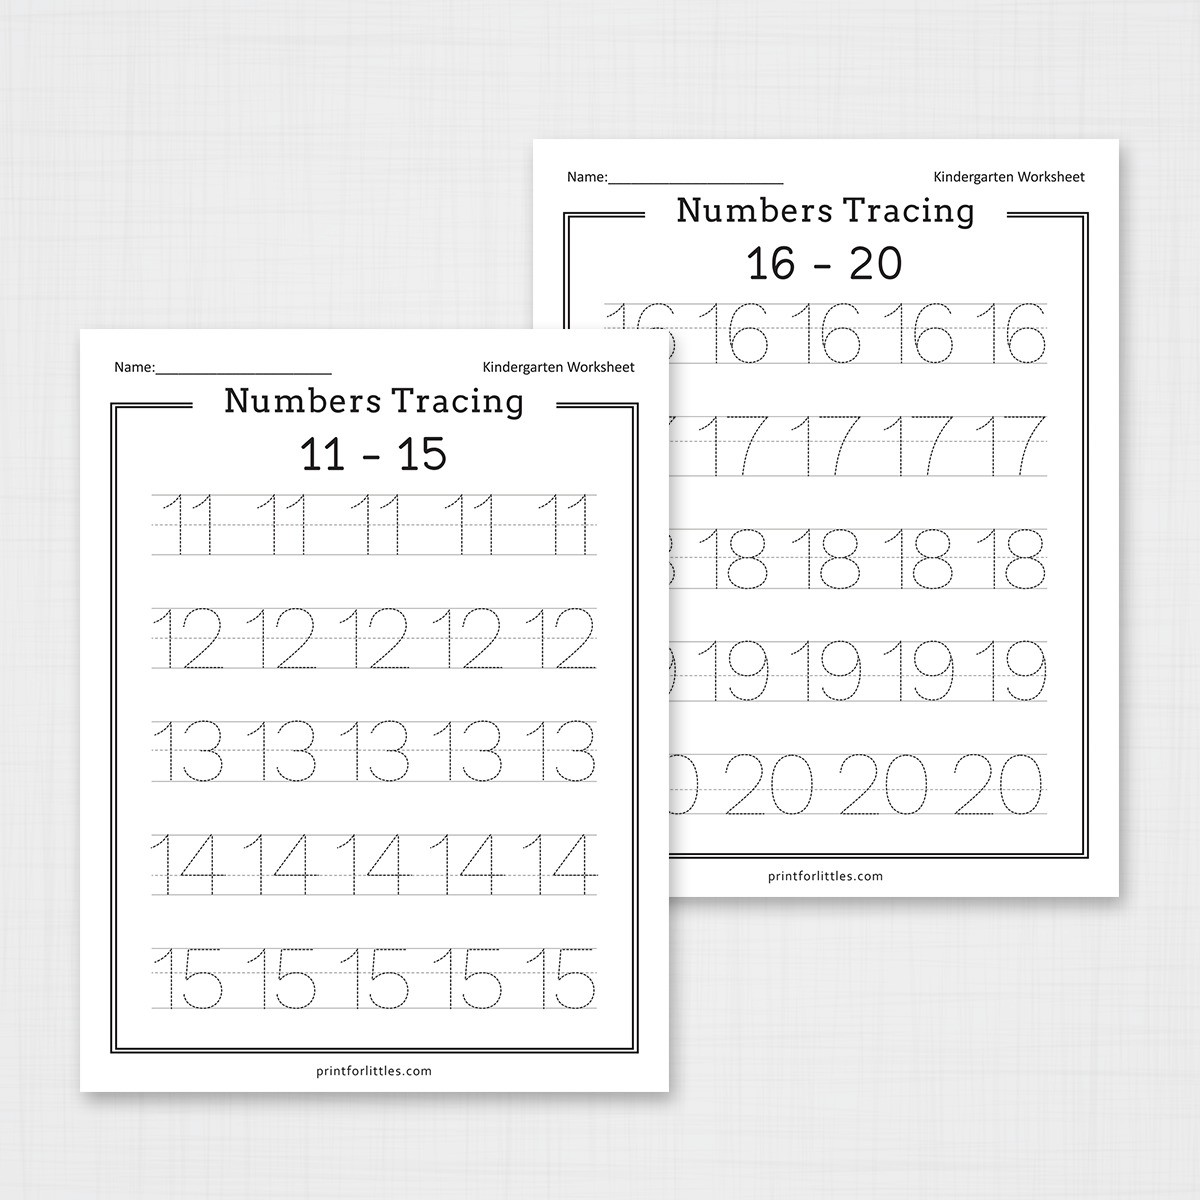 12 for 12/12/12!  Numbers typography, Planner printables free, Graphic  design logo